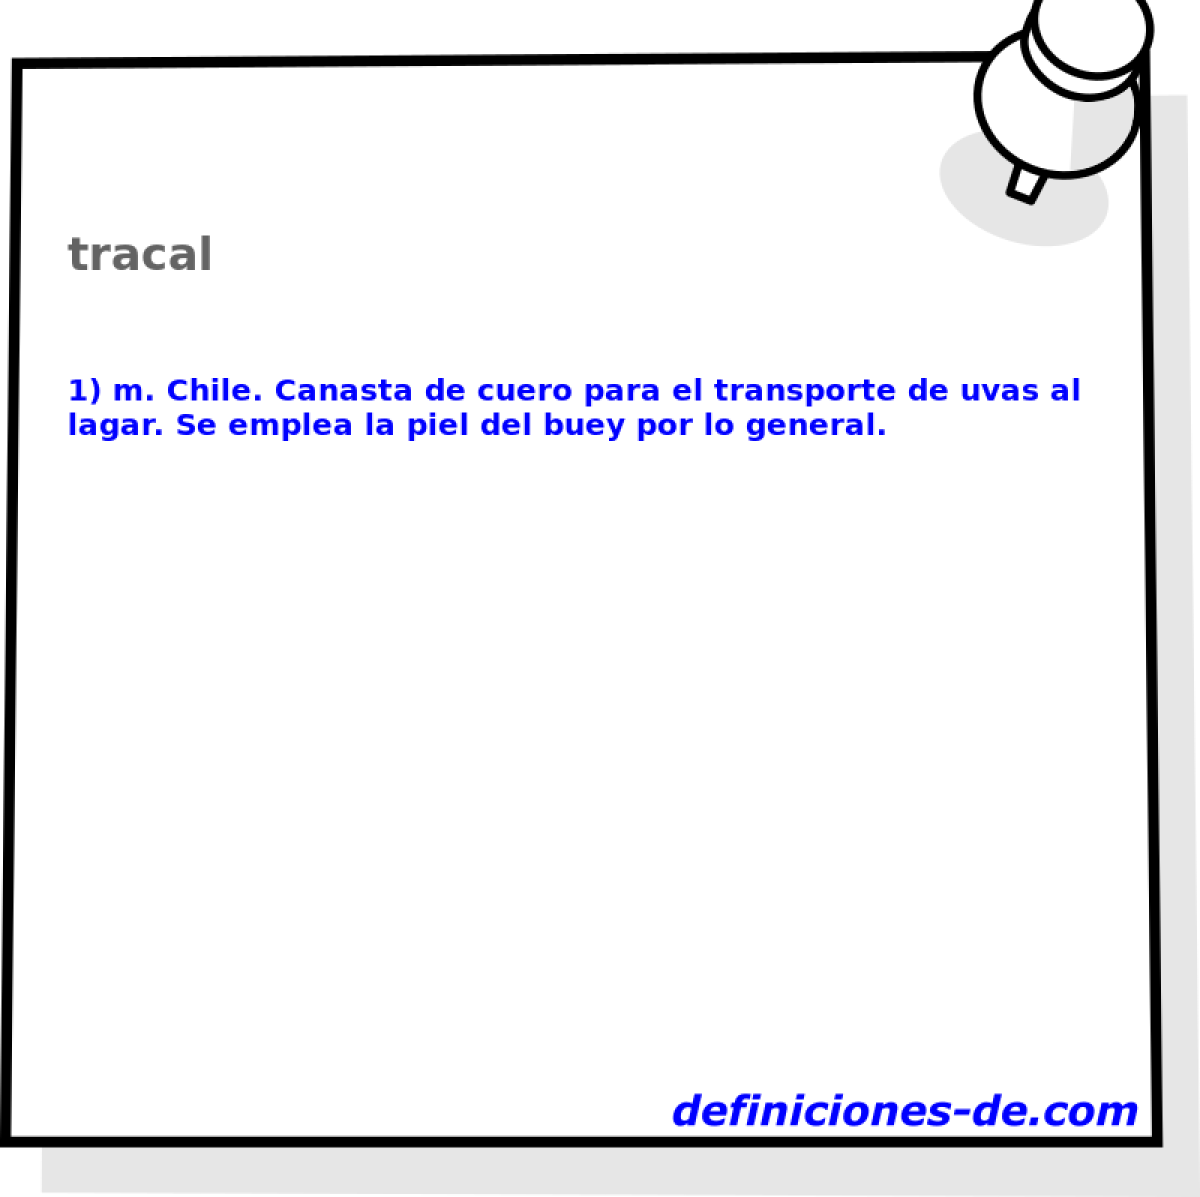 tracal 